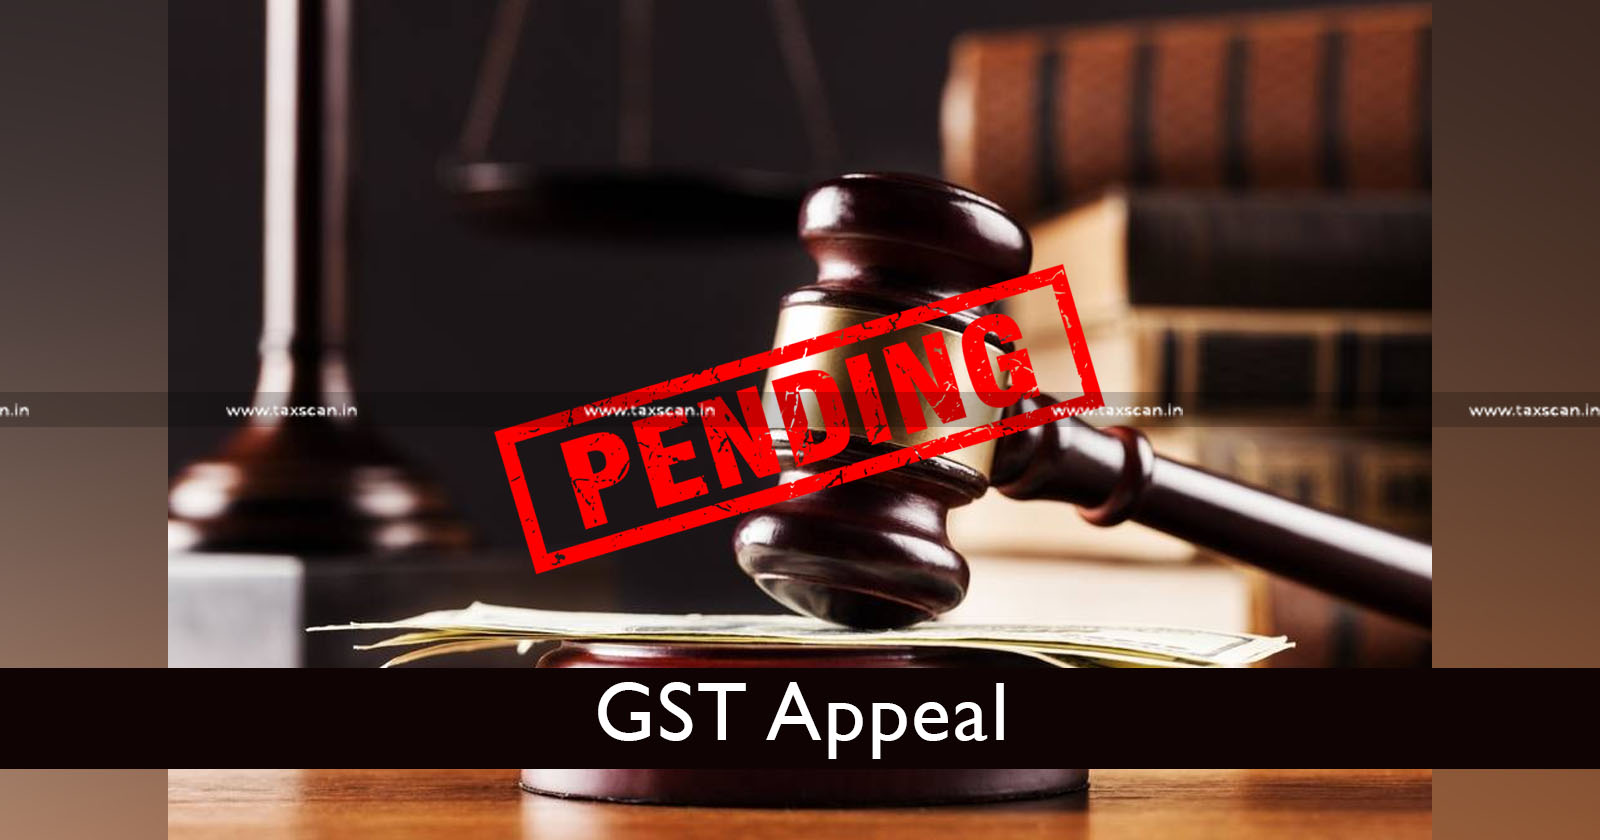 GST Appeals Pending against Contested Tax Demands - Central GST Authorities - Finance Ministry before Parliament - Contested Tax Demands by Central GST Authorities - taxscan